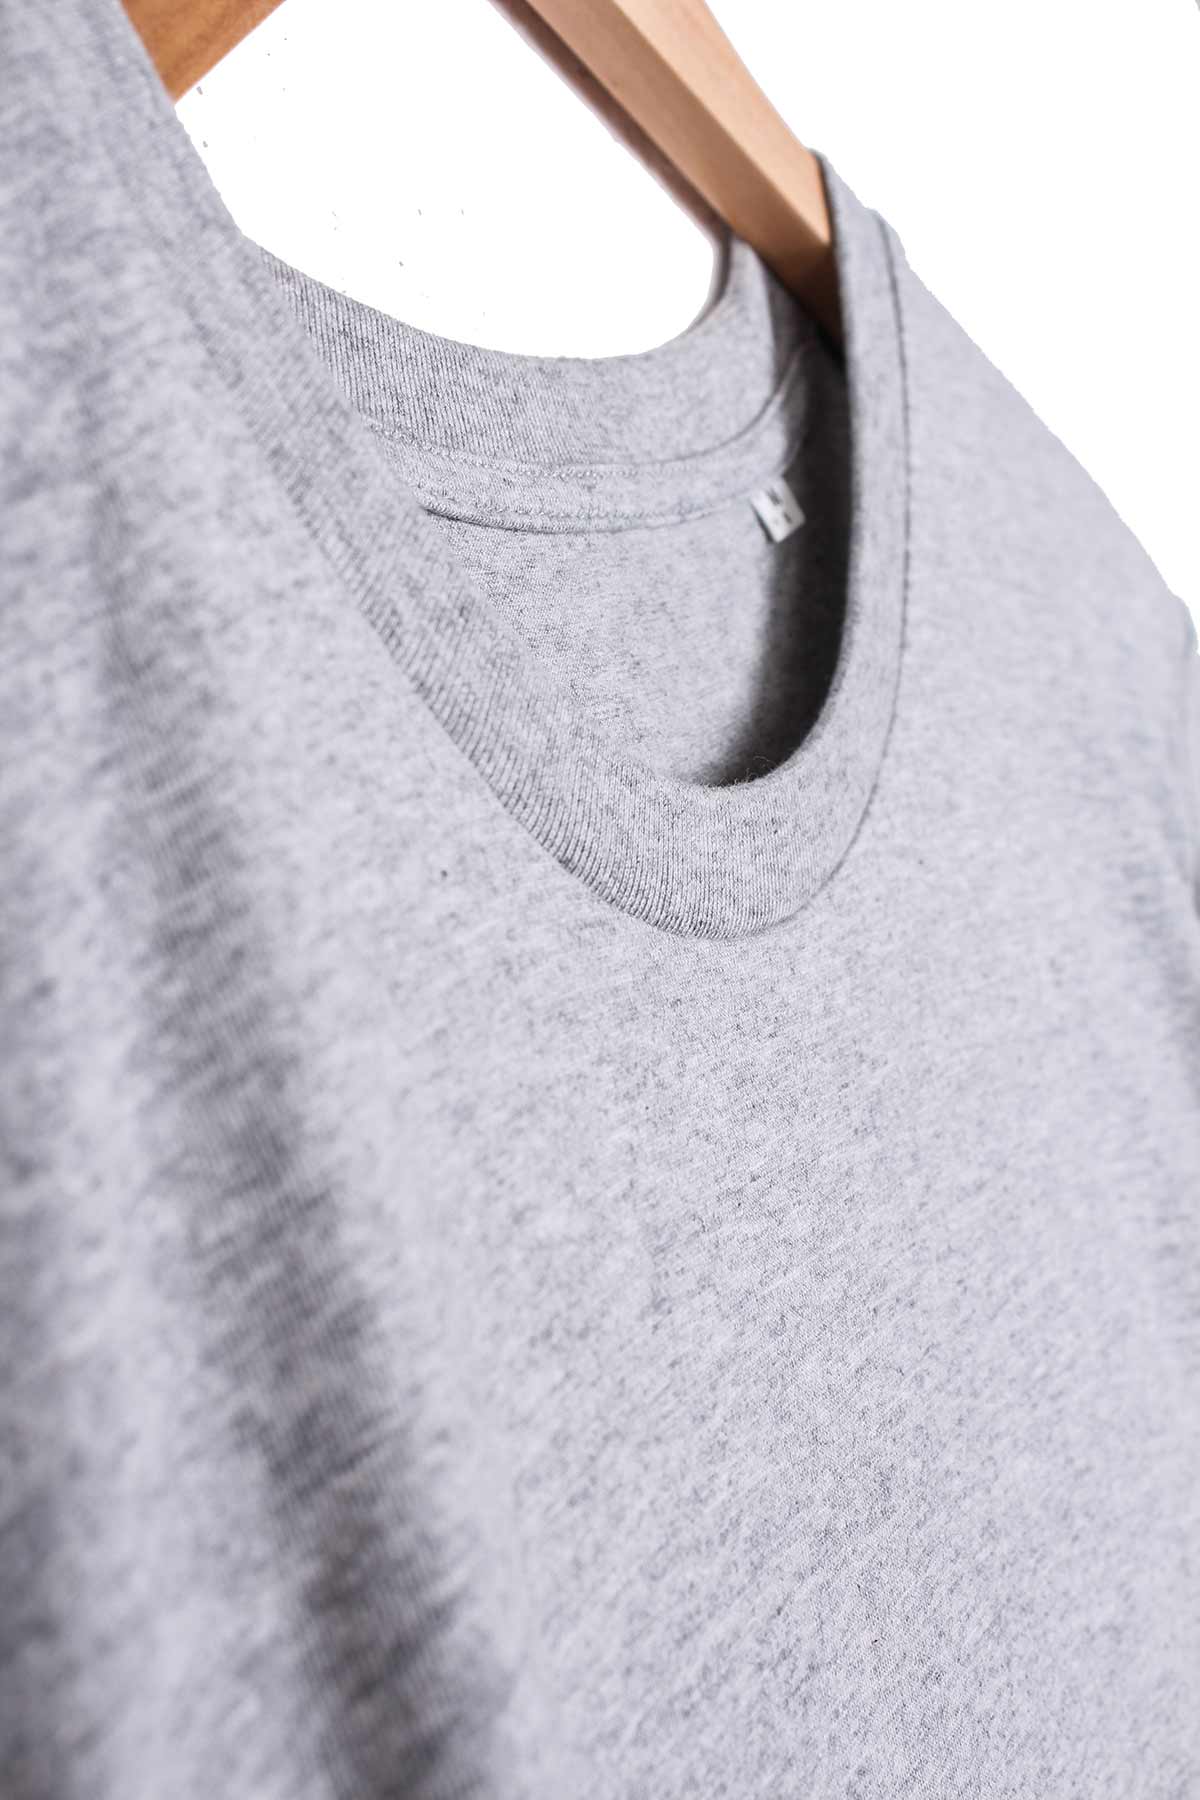 Women's Organic Cotton T-Shirts | Affordable Sustainable Fashion ...